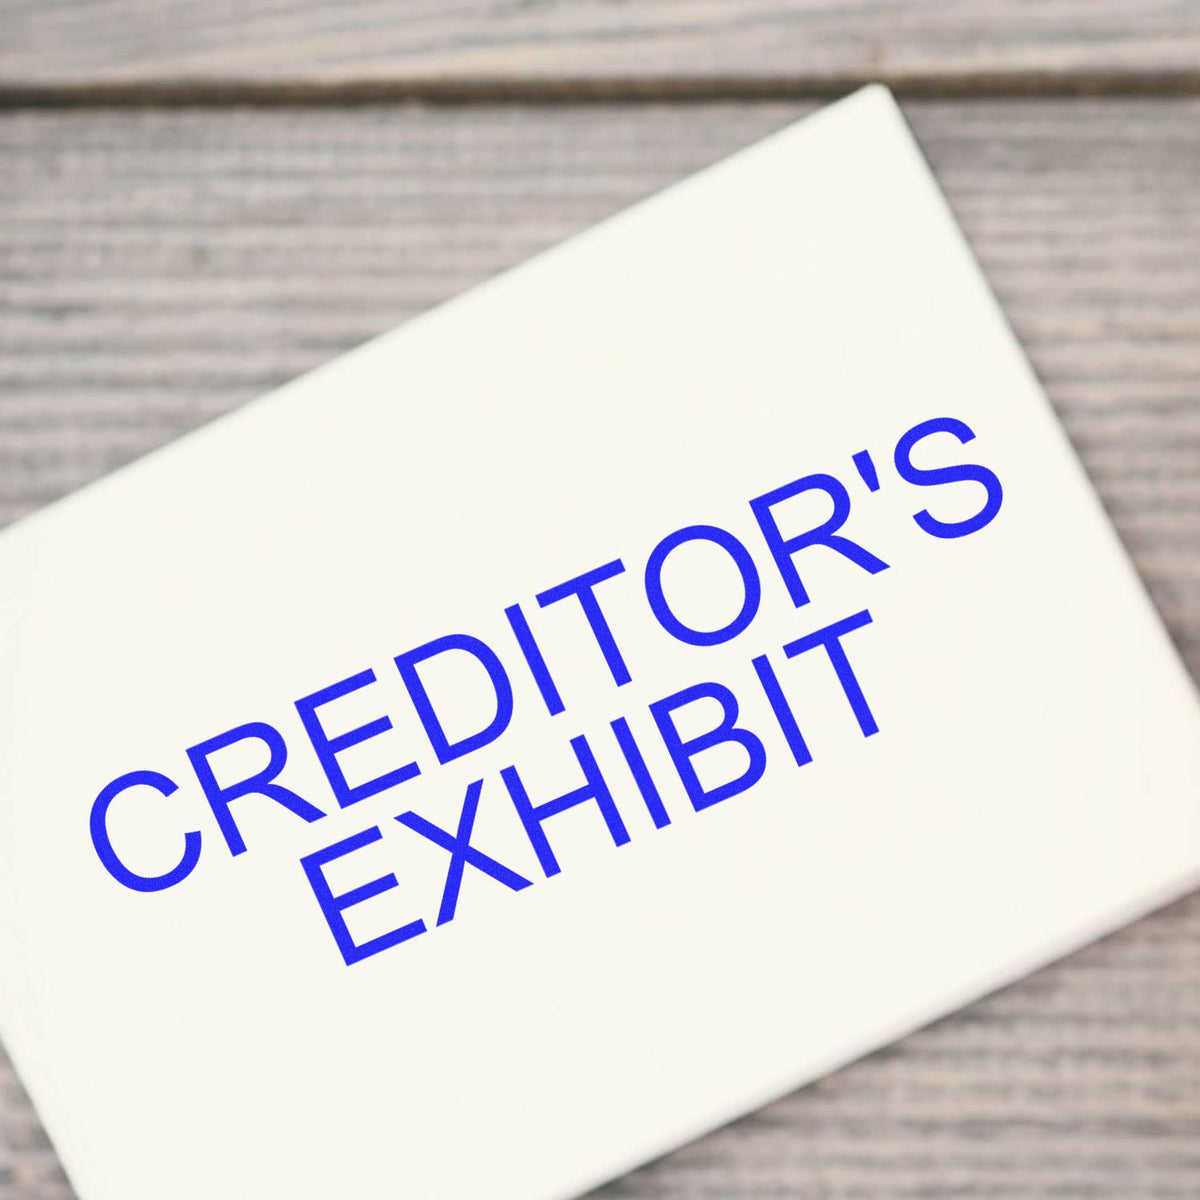 Self-Inking Creditors Exhibit Stamp In Use Photo